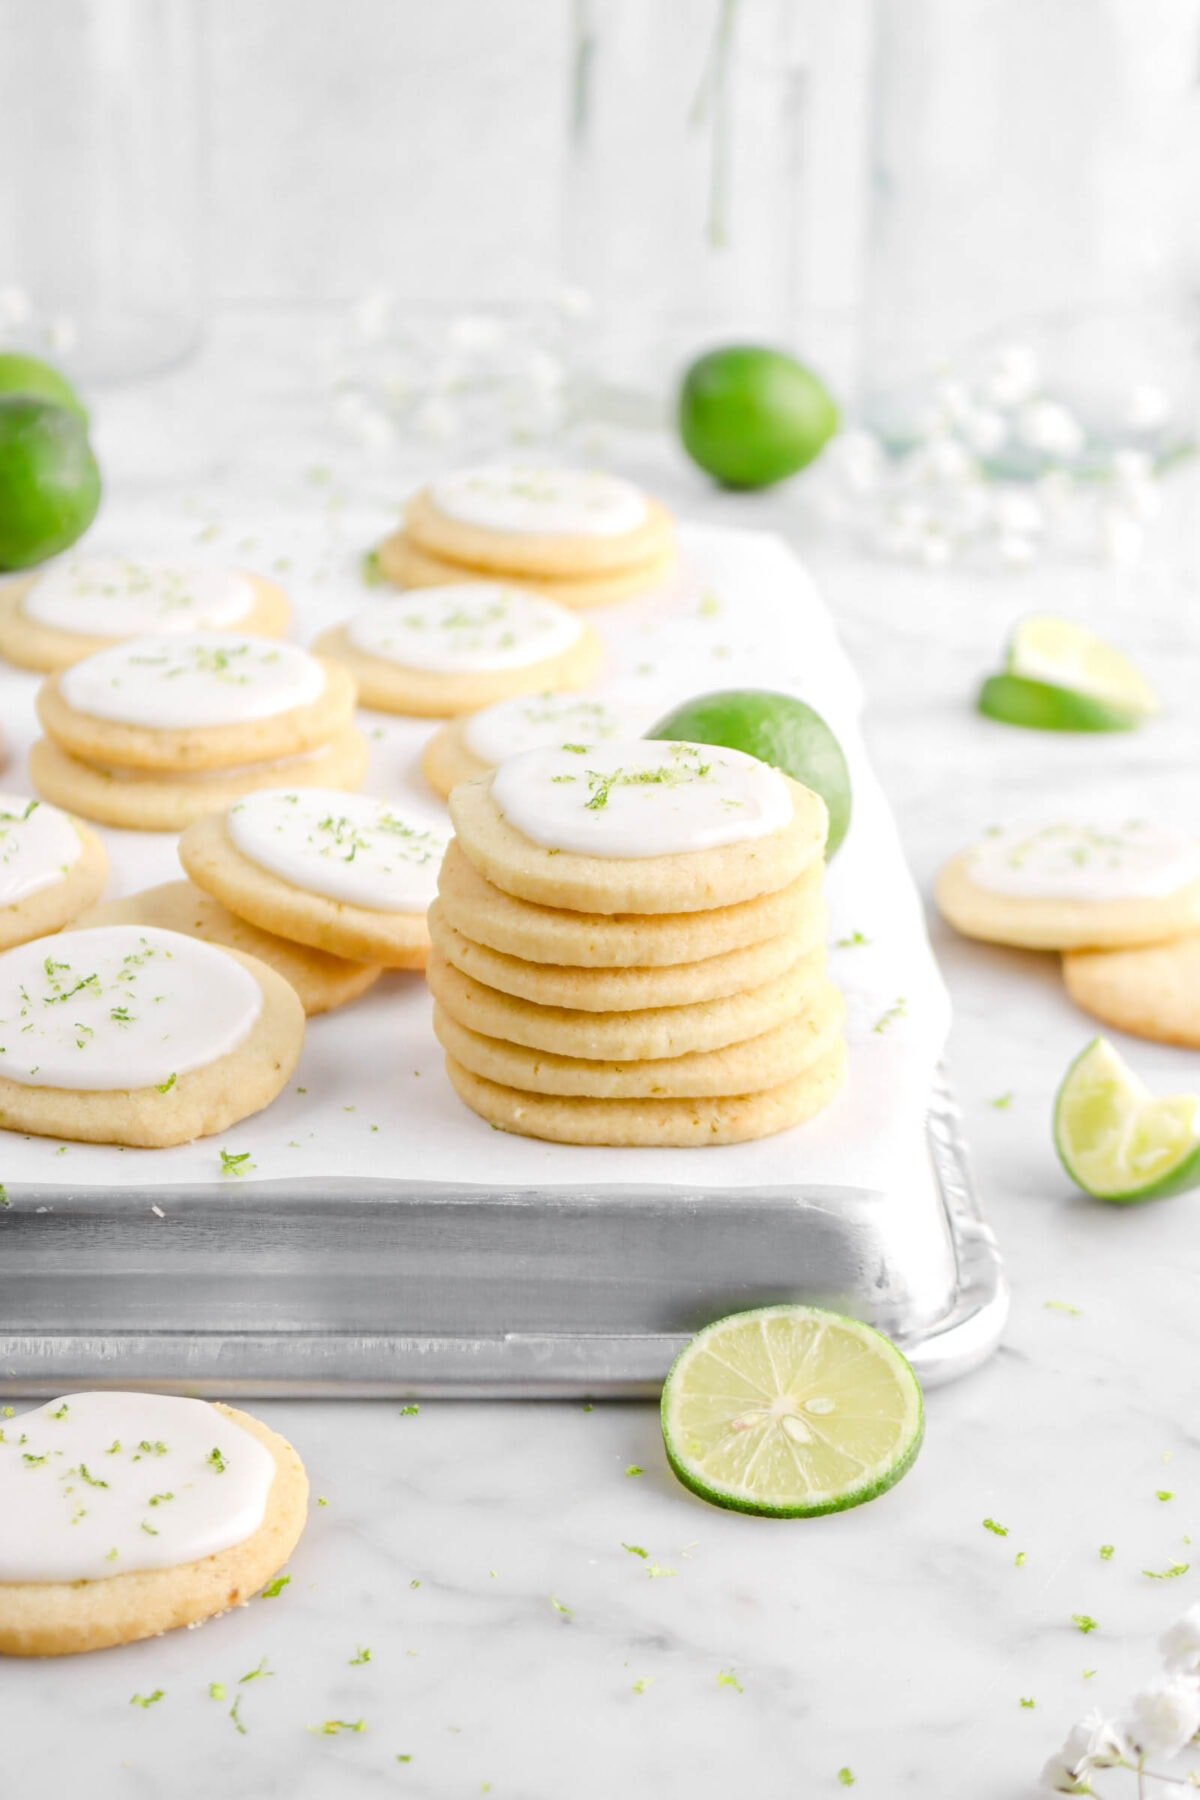 stacked key lime cookies on upside down sheet pan with more cookies behind, key limes, and white flowers on marble surface